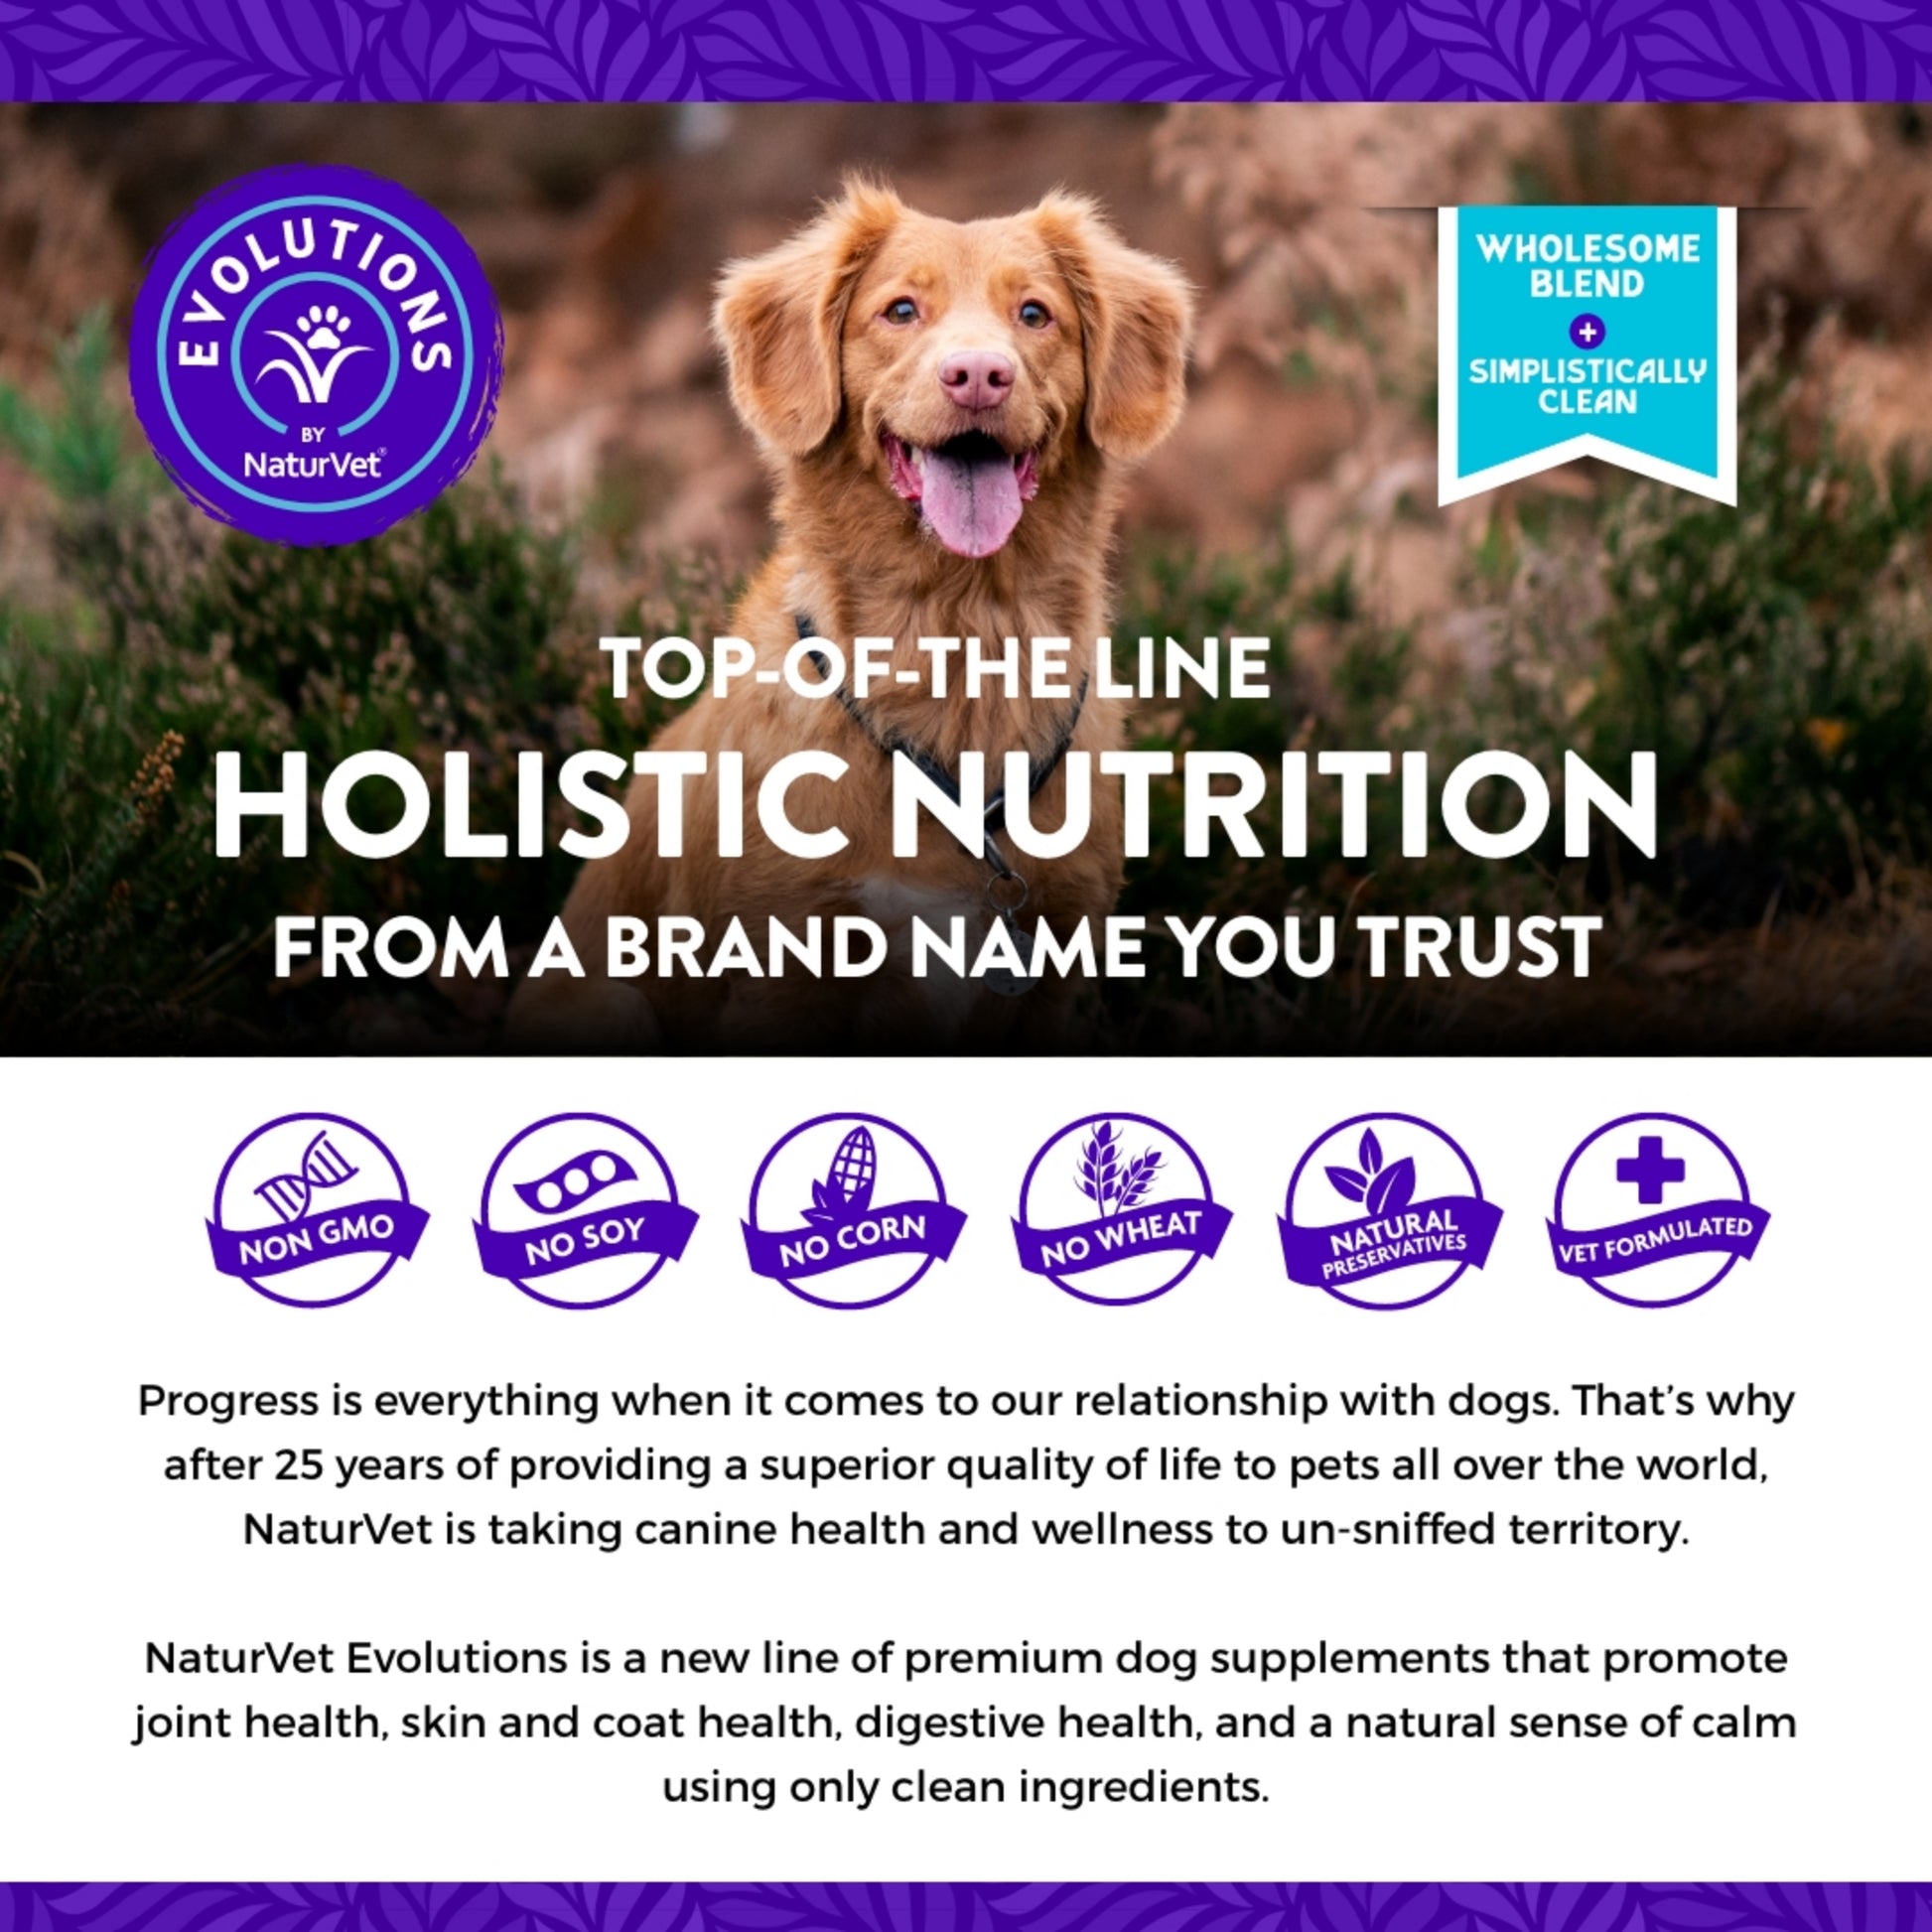 MOVOFLEX® Advanced: the latest advancement in canine joint health 